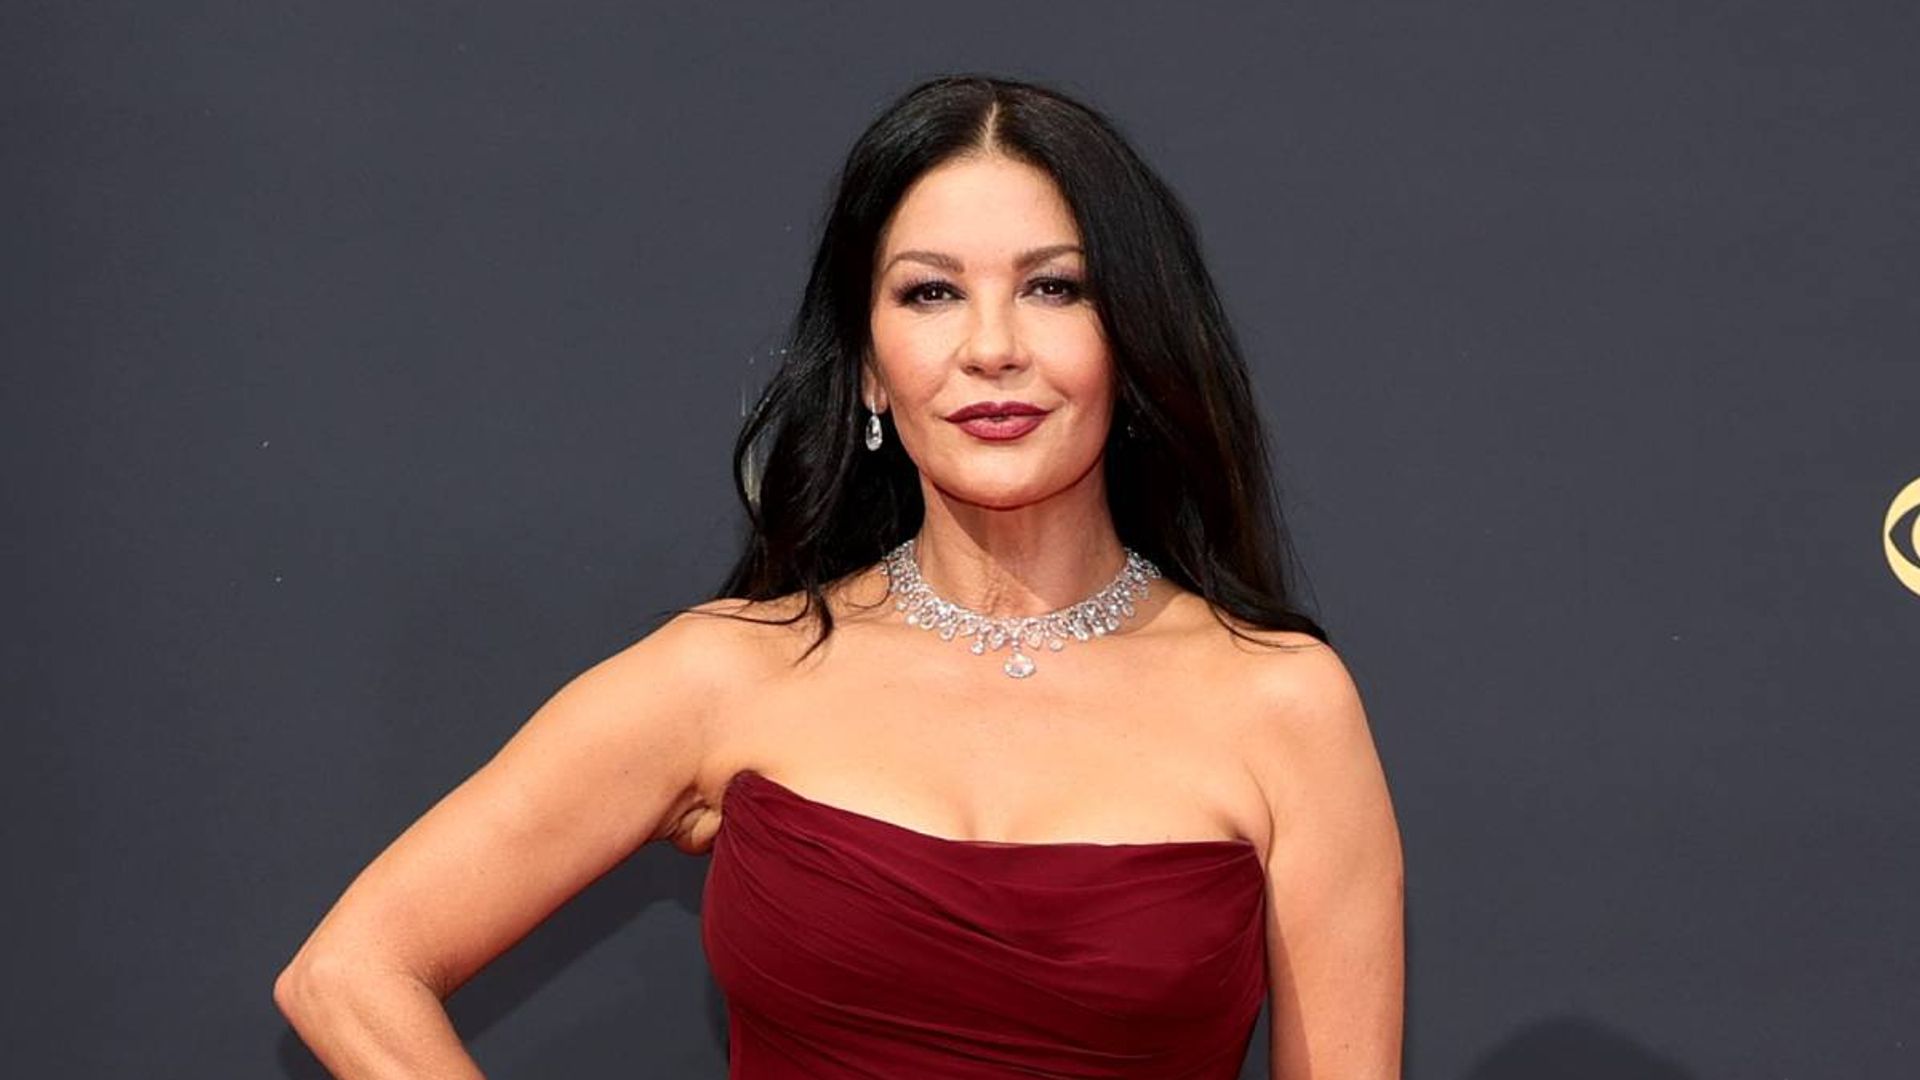 Catherine Zeta-Jones reveals curious work habit as she shares behind-the-scenes glimpse from latest project